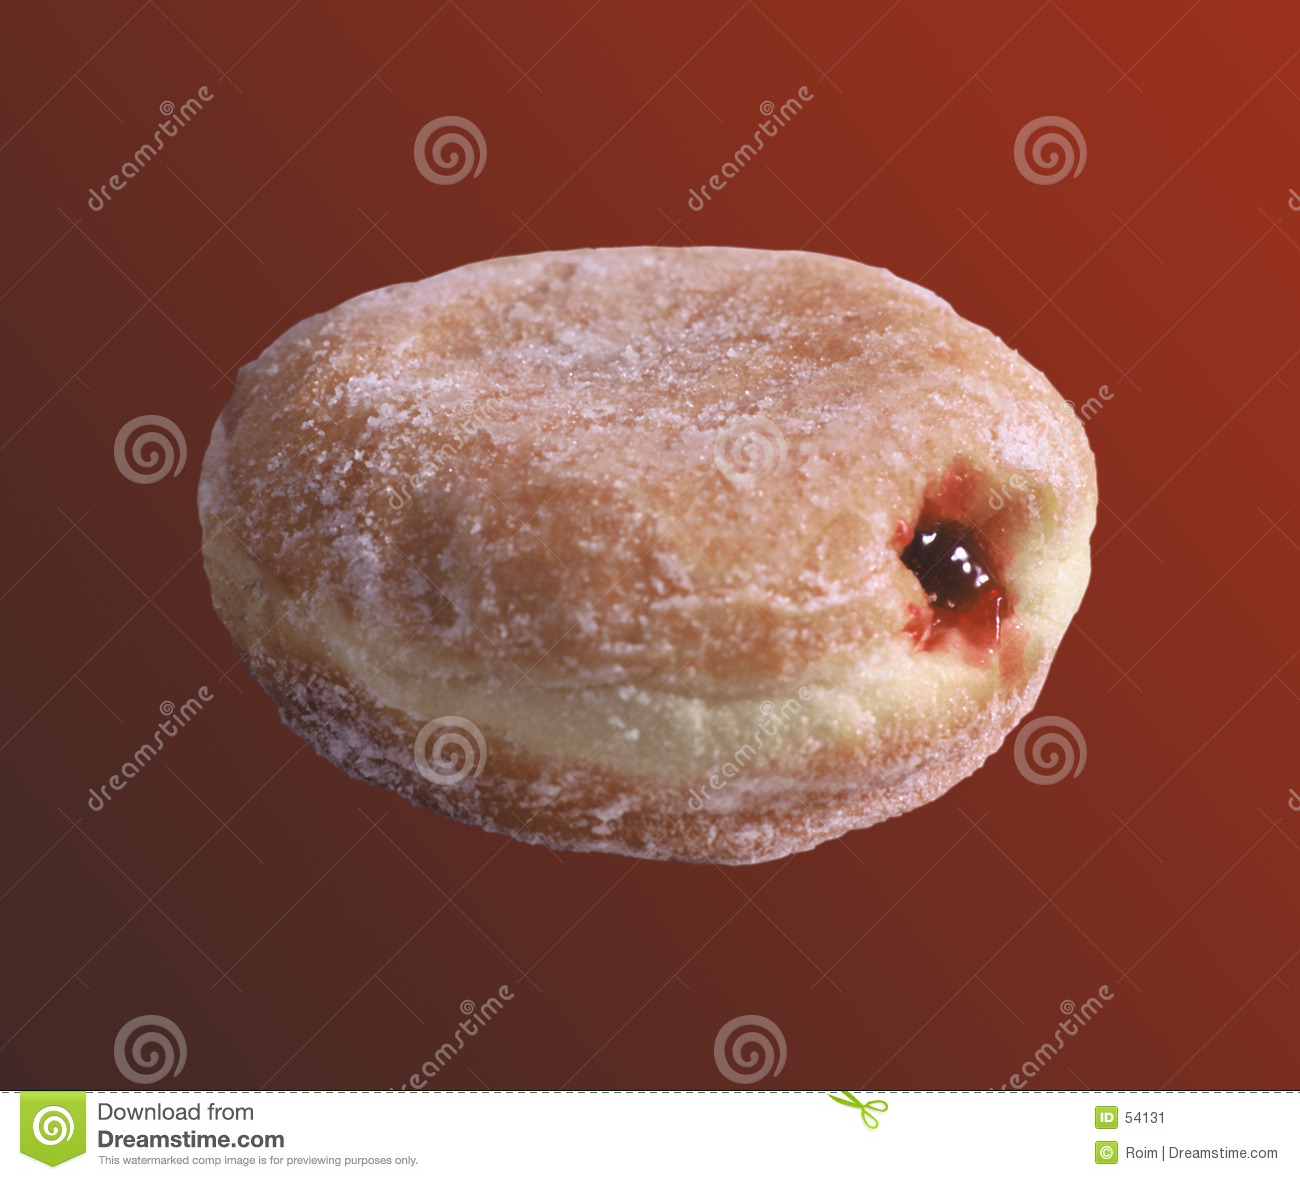 Jelly Donut Clipart Jelly Filled Donut Stock Image   Image  54131